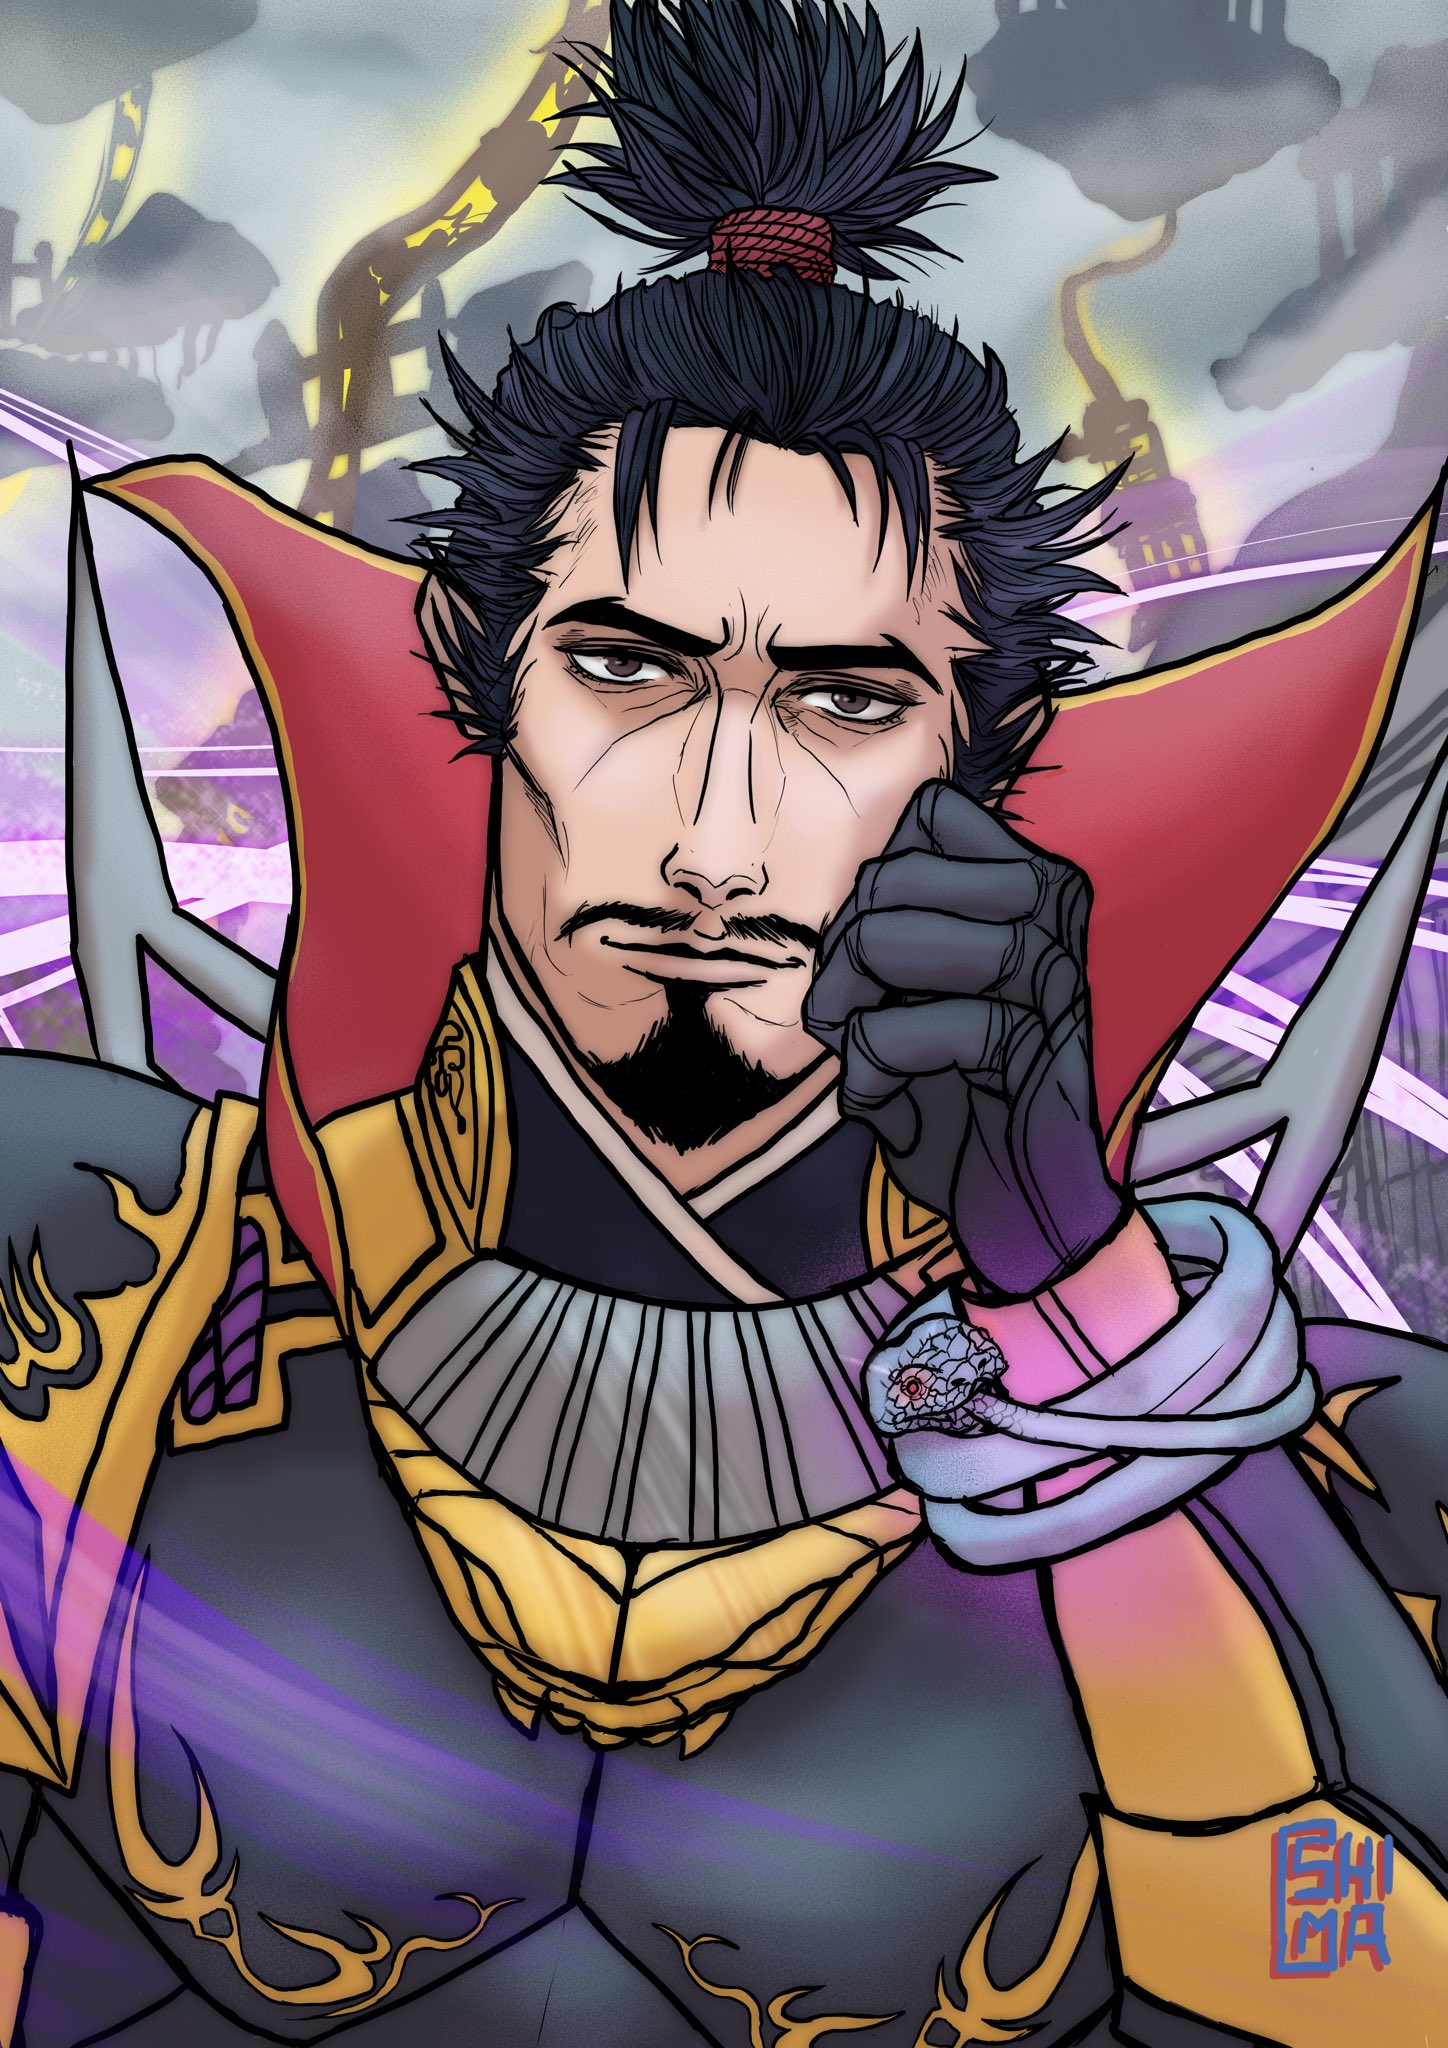 Shima My No 1 Favorite Since I Am Still In Elementary School It S Nobunaga Oda I Even Follow Almost All Samurai Warriors And Warriors Orochi Games Just Because I Love Him